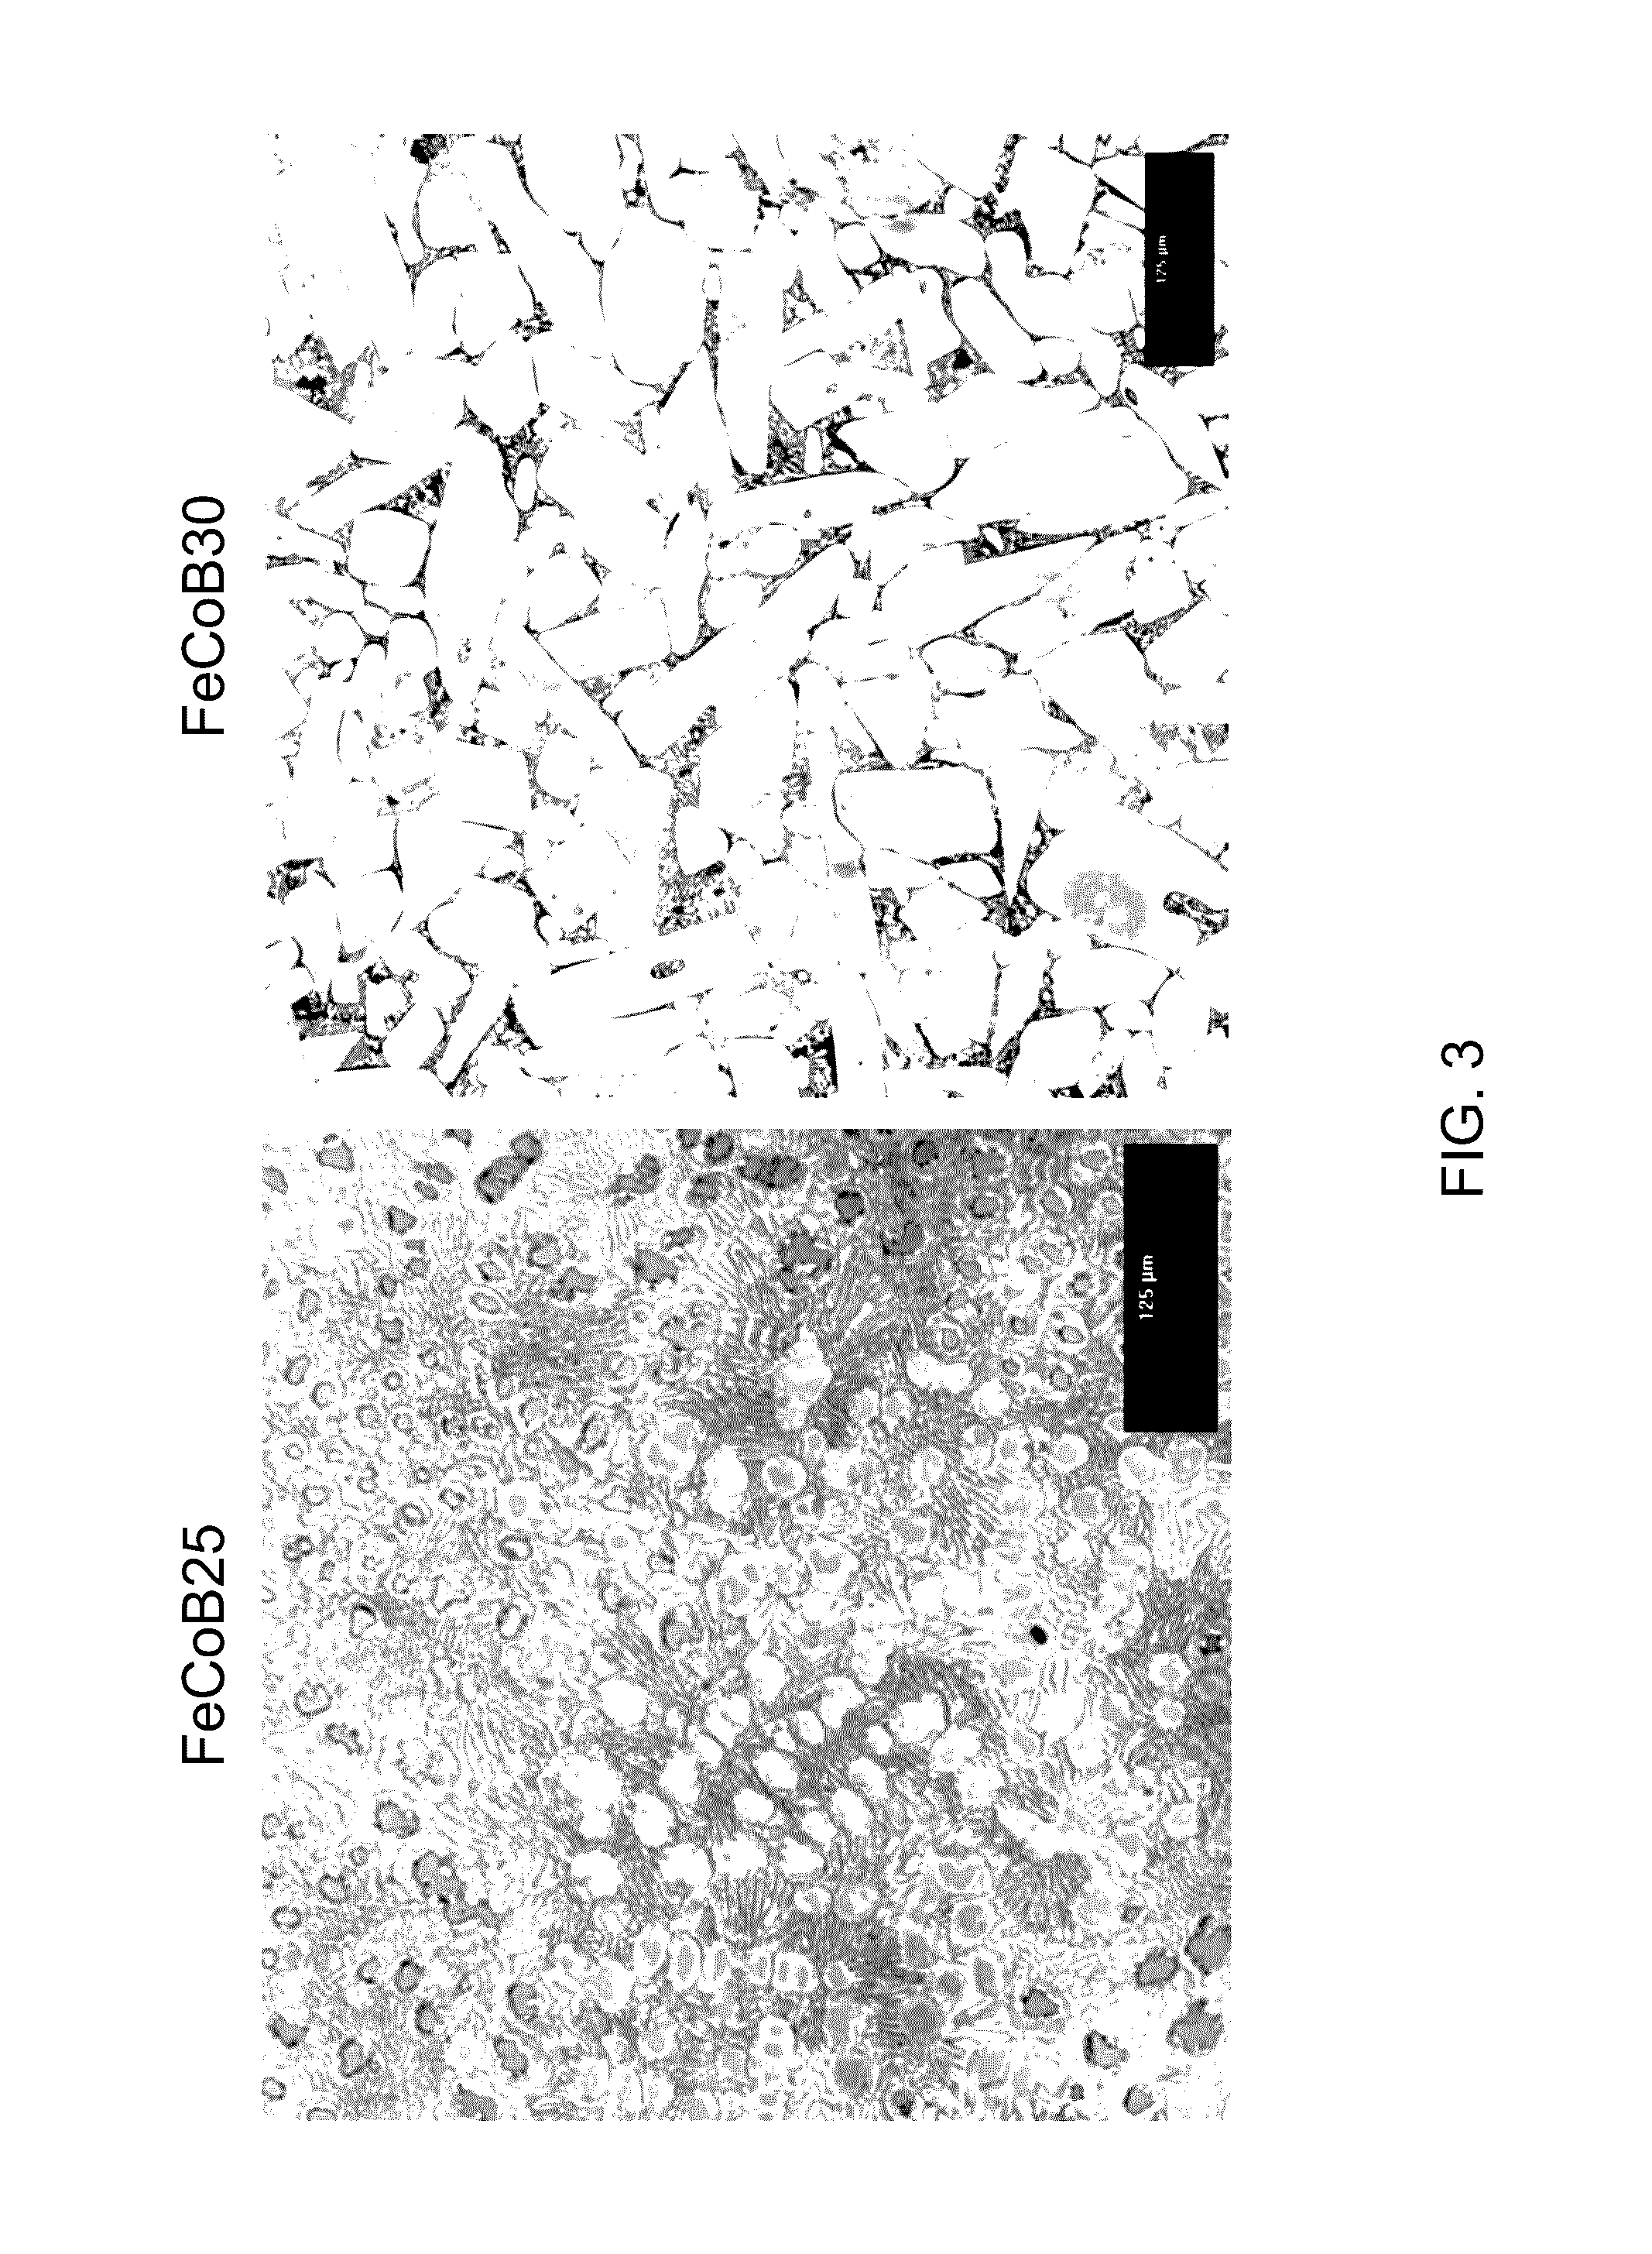 Cobalt, iron, boron, and/or nickel alloy-containing articles and methods for making same